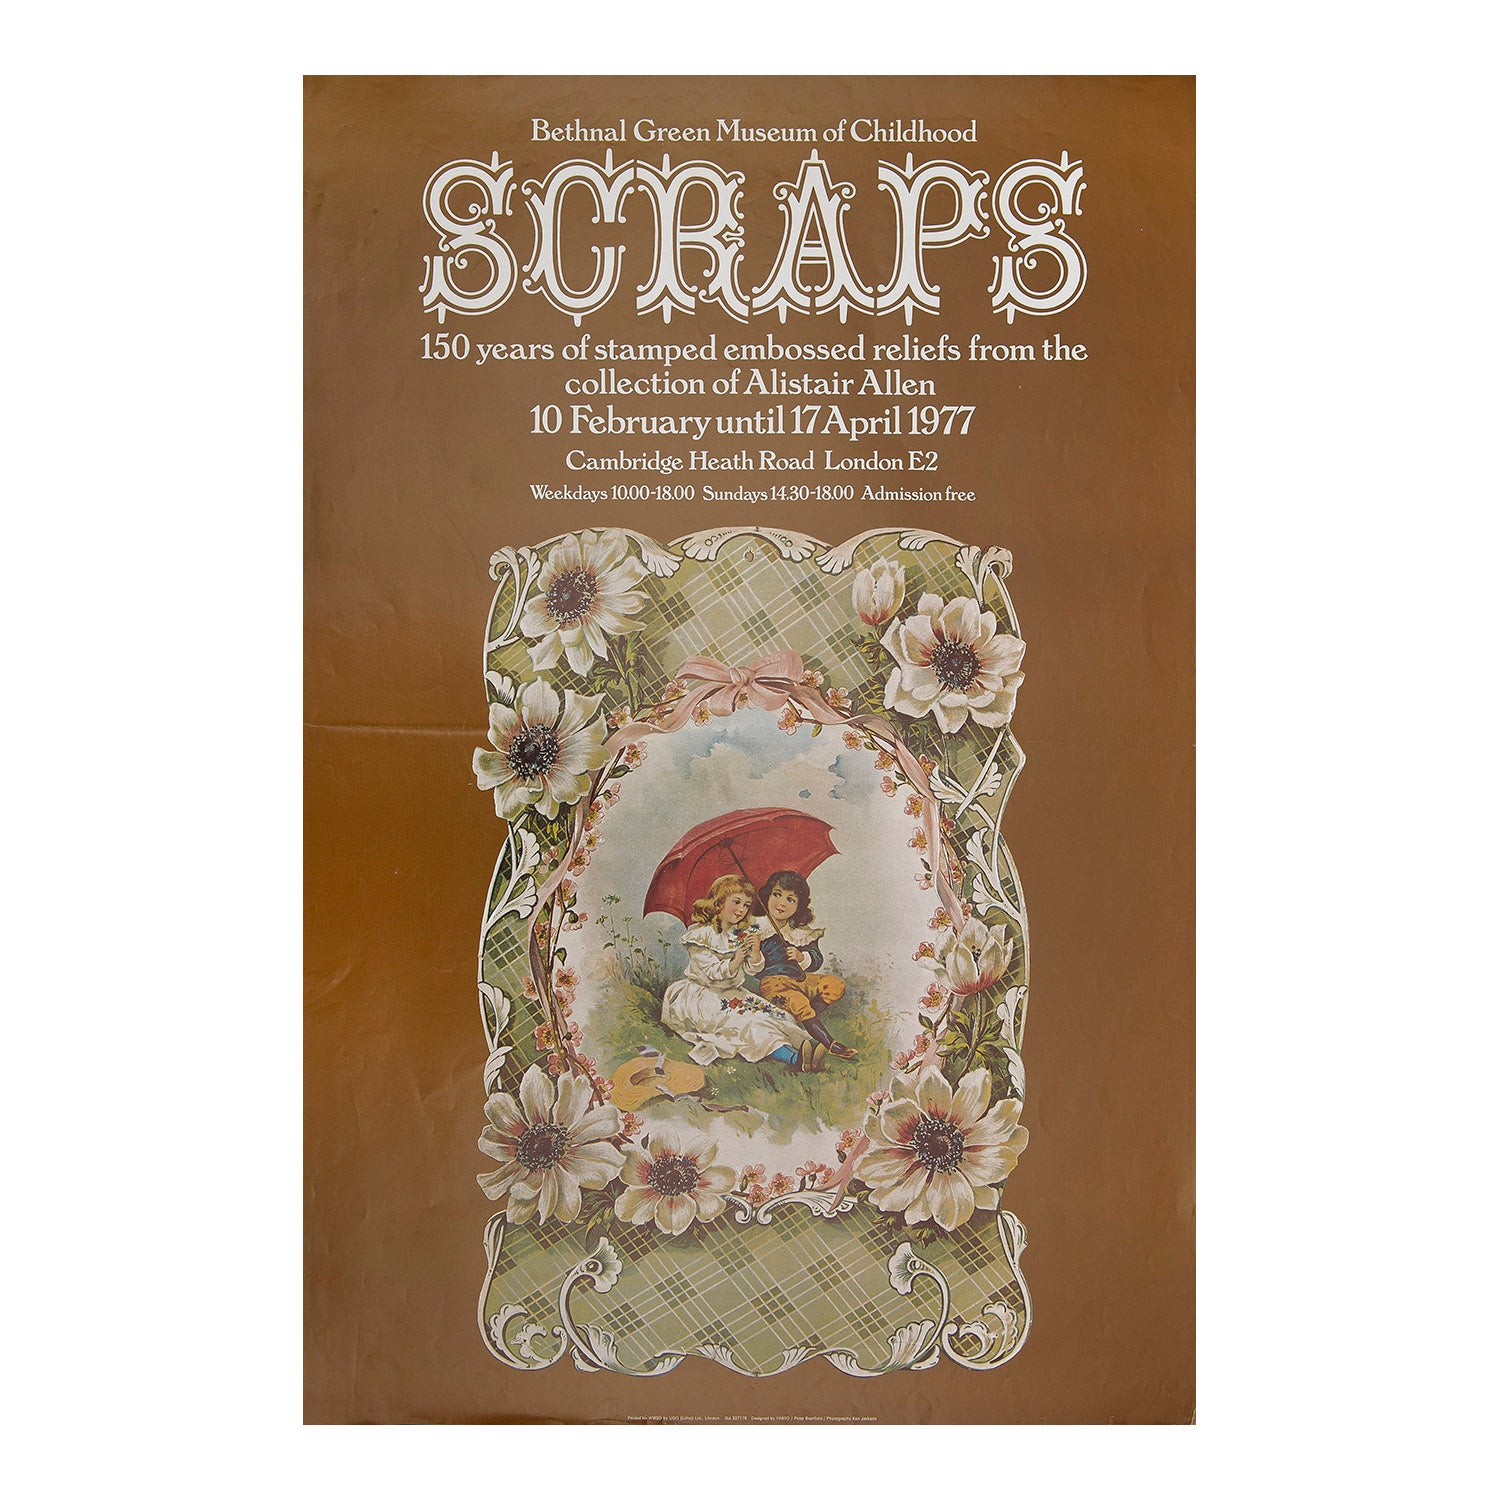 Scraps. 150 years of stamped embossed reliefs from the collection of Alistair Allen